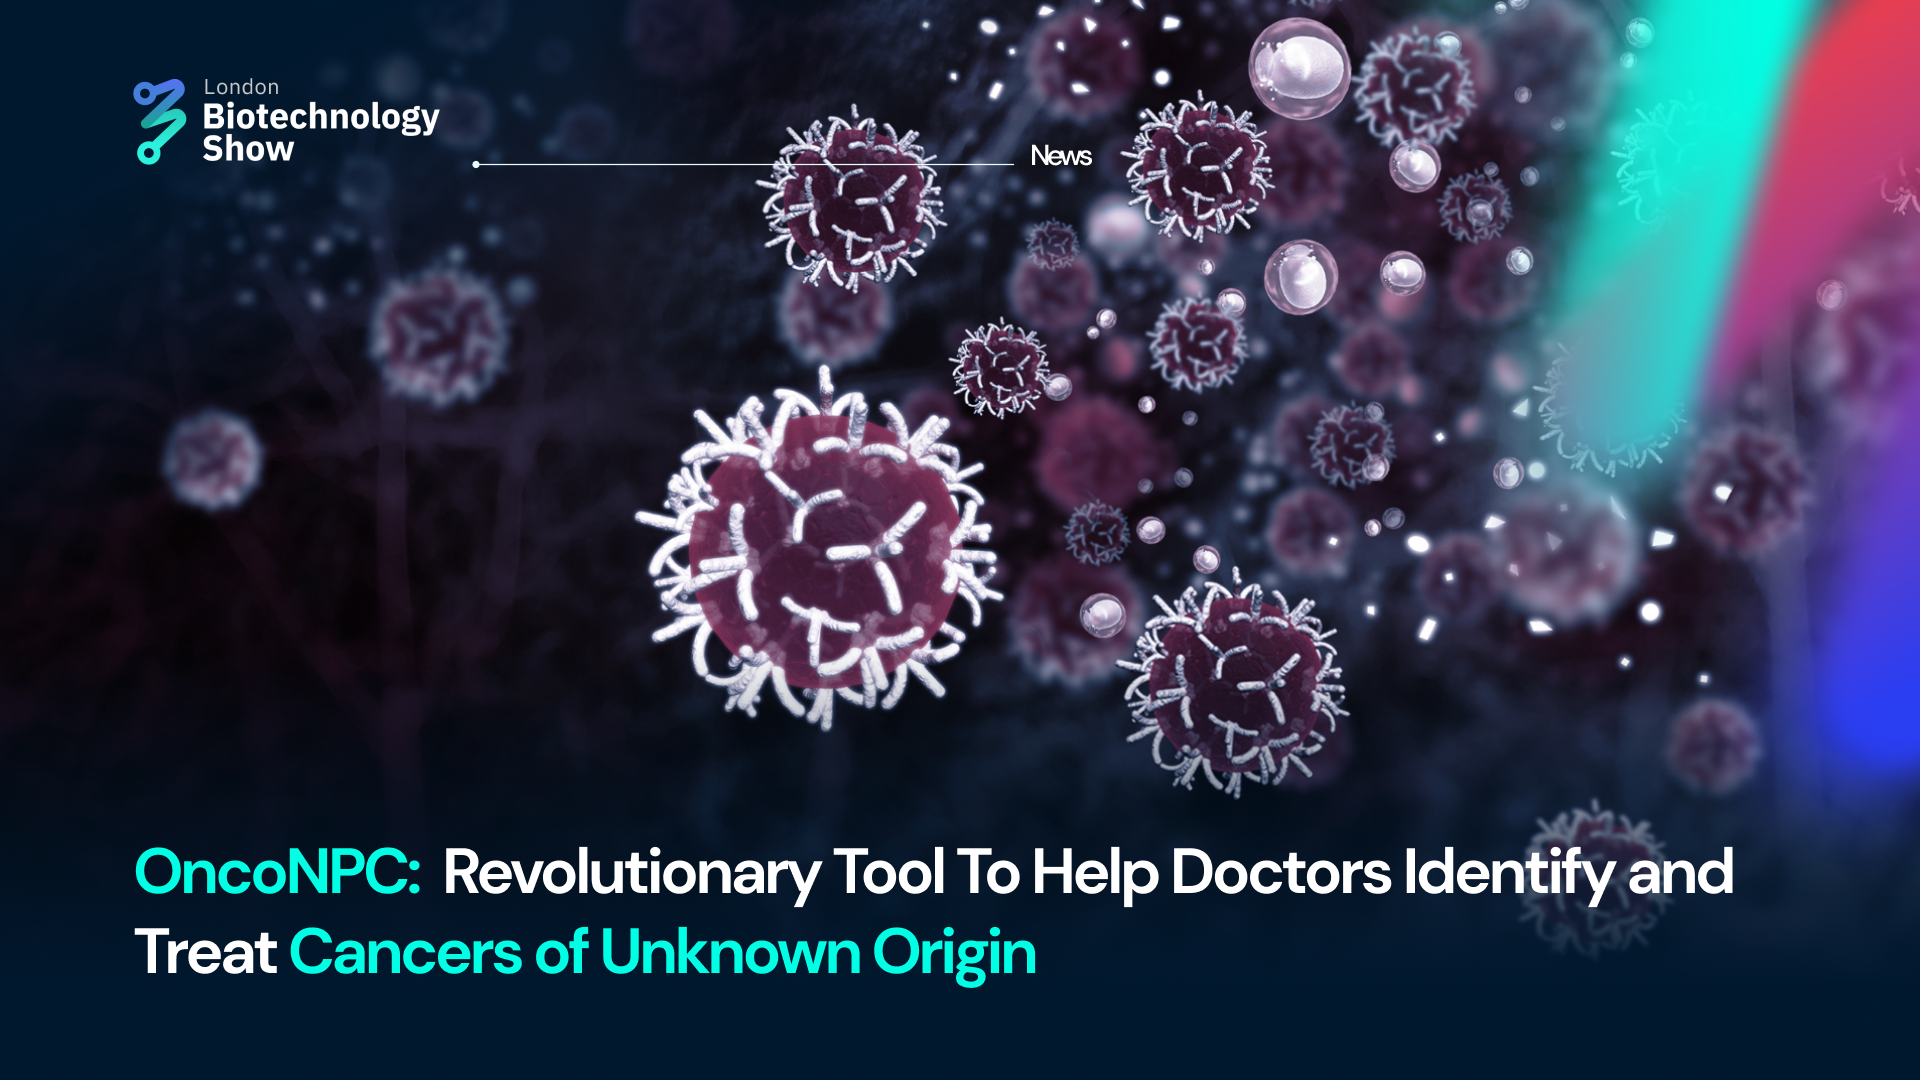 OncoNPC: Revolutionary Tool To Help Doctors Identify and Treat Cancers of Unknown Origin